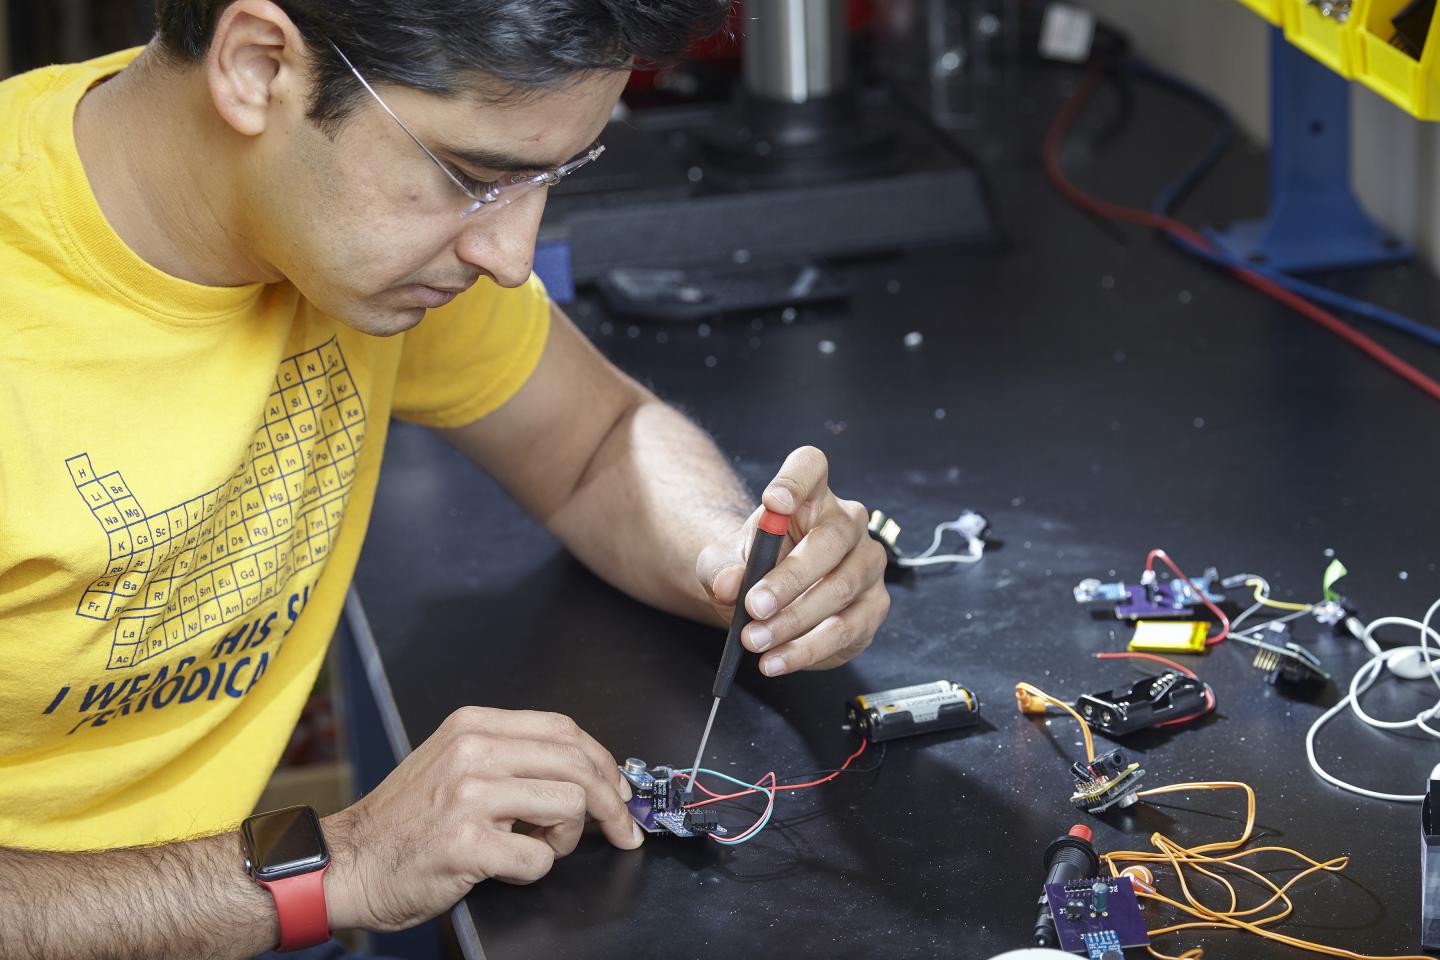 Georgia Tech assistant professor M. Saad Bhamla assembles a prototype LoCHAid, an ultra-low-cost hearing aid built with a 3D-printed case and components that cost less than a dollar. Source: Craig Bromley